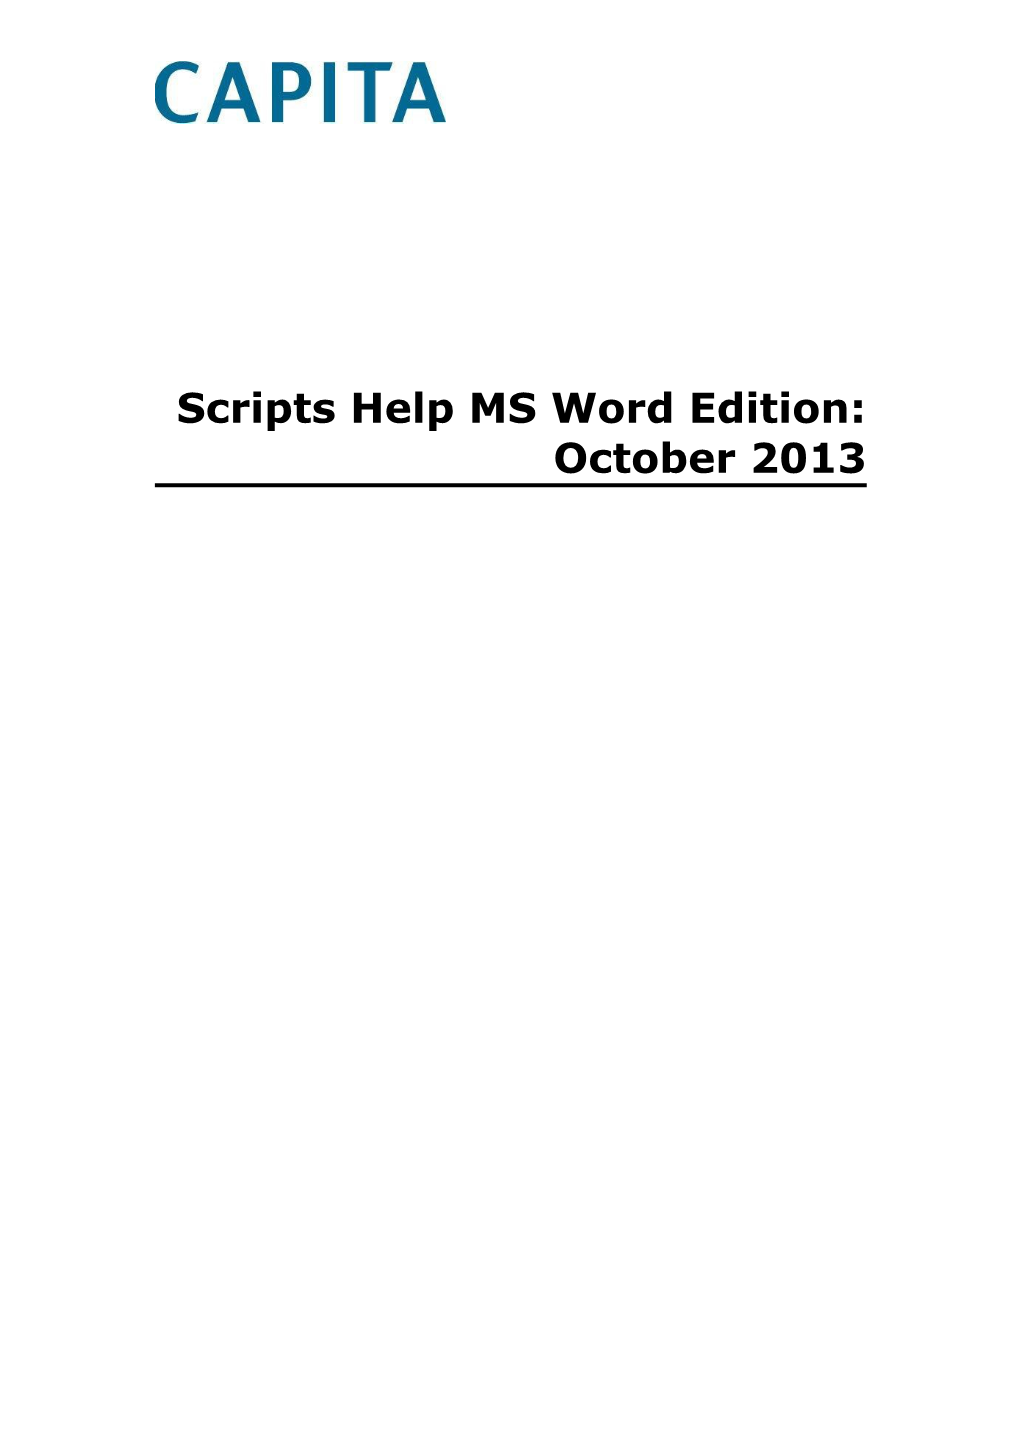 Scripts Help MS Word Edition: October 2012